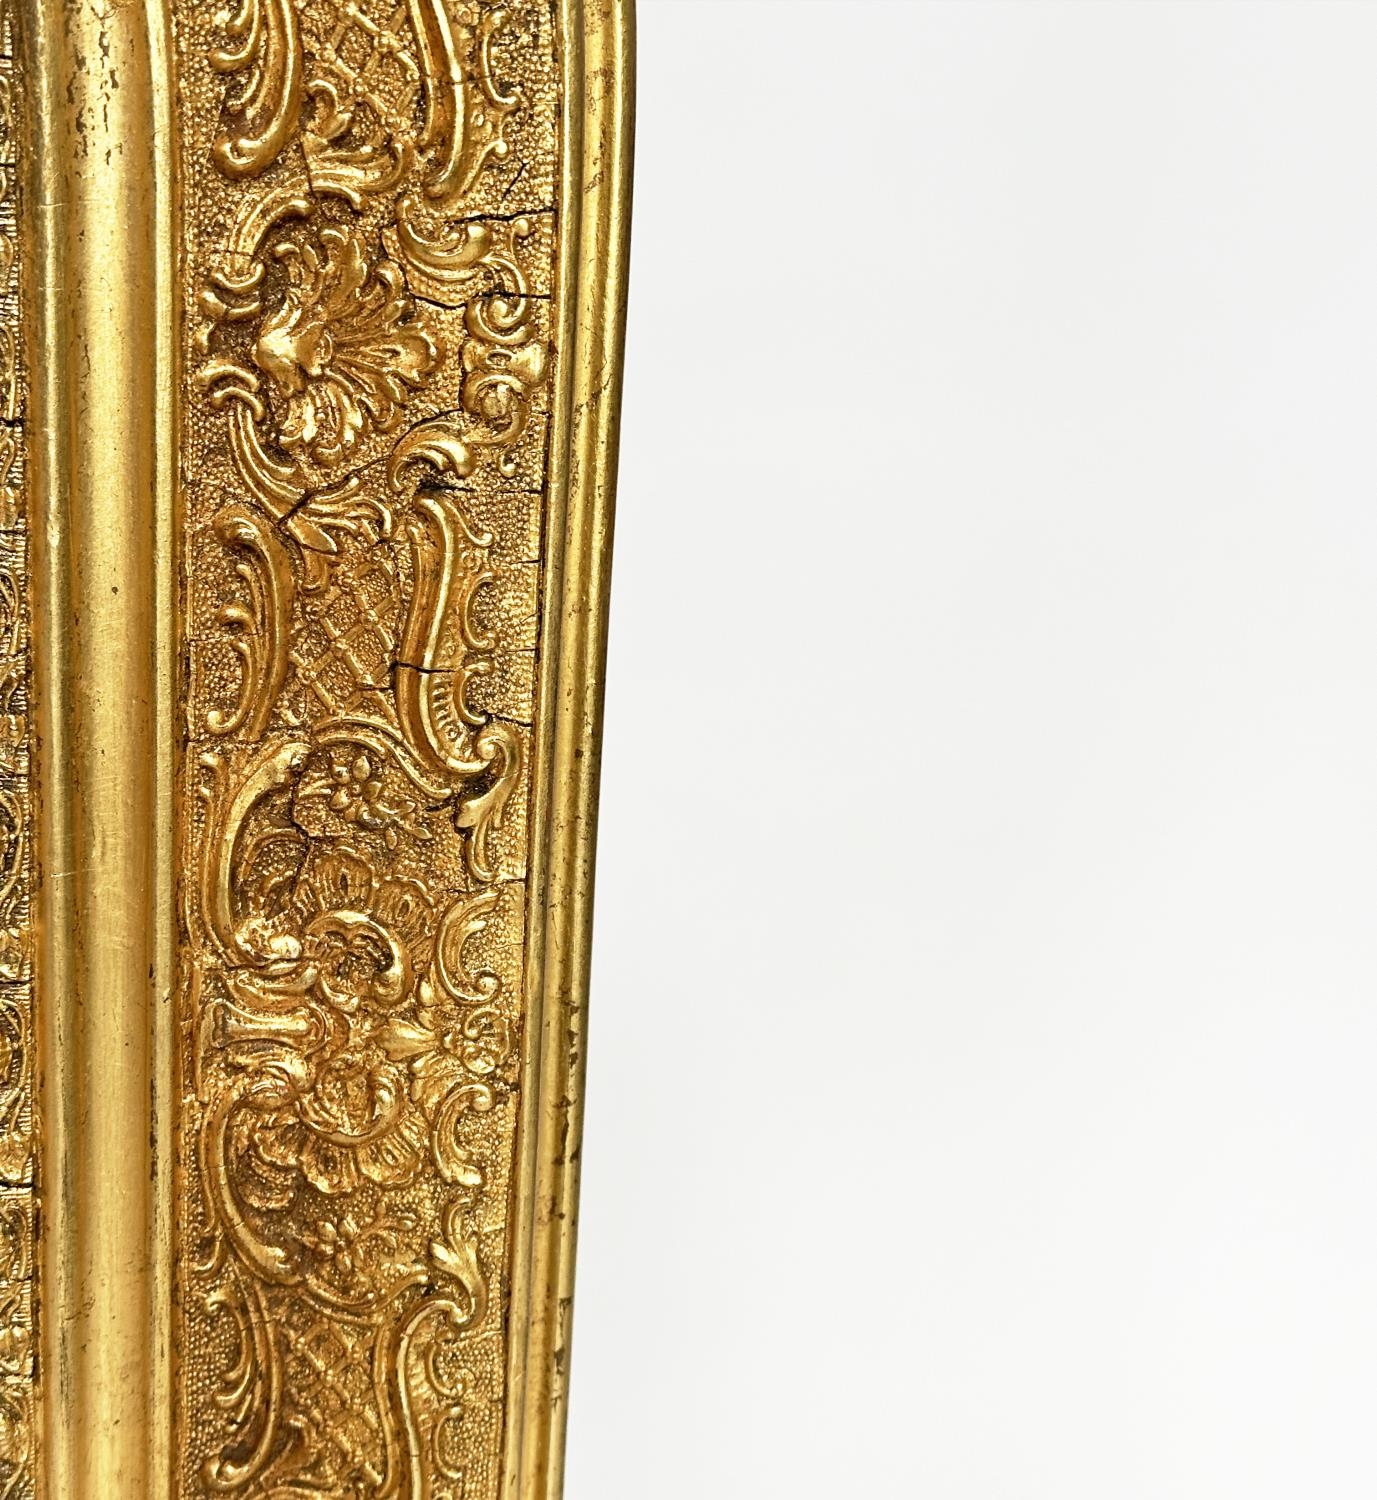 WALL MIRROR, 19th century French giltwood and gesso mounted arched with flambeau and quiver crest, - Image 4 of 7